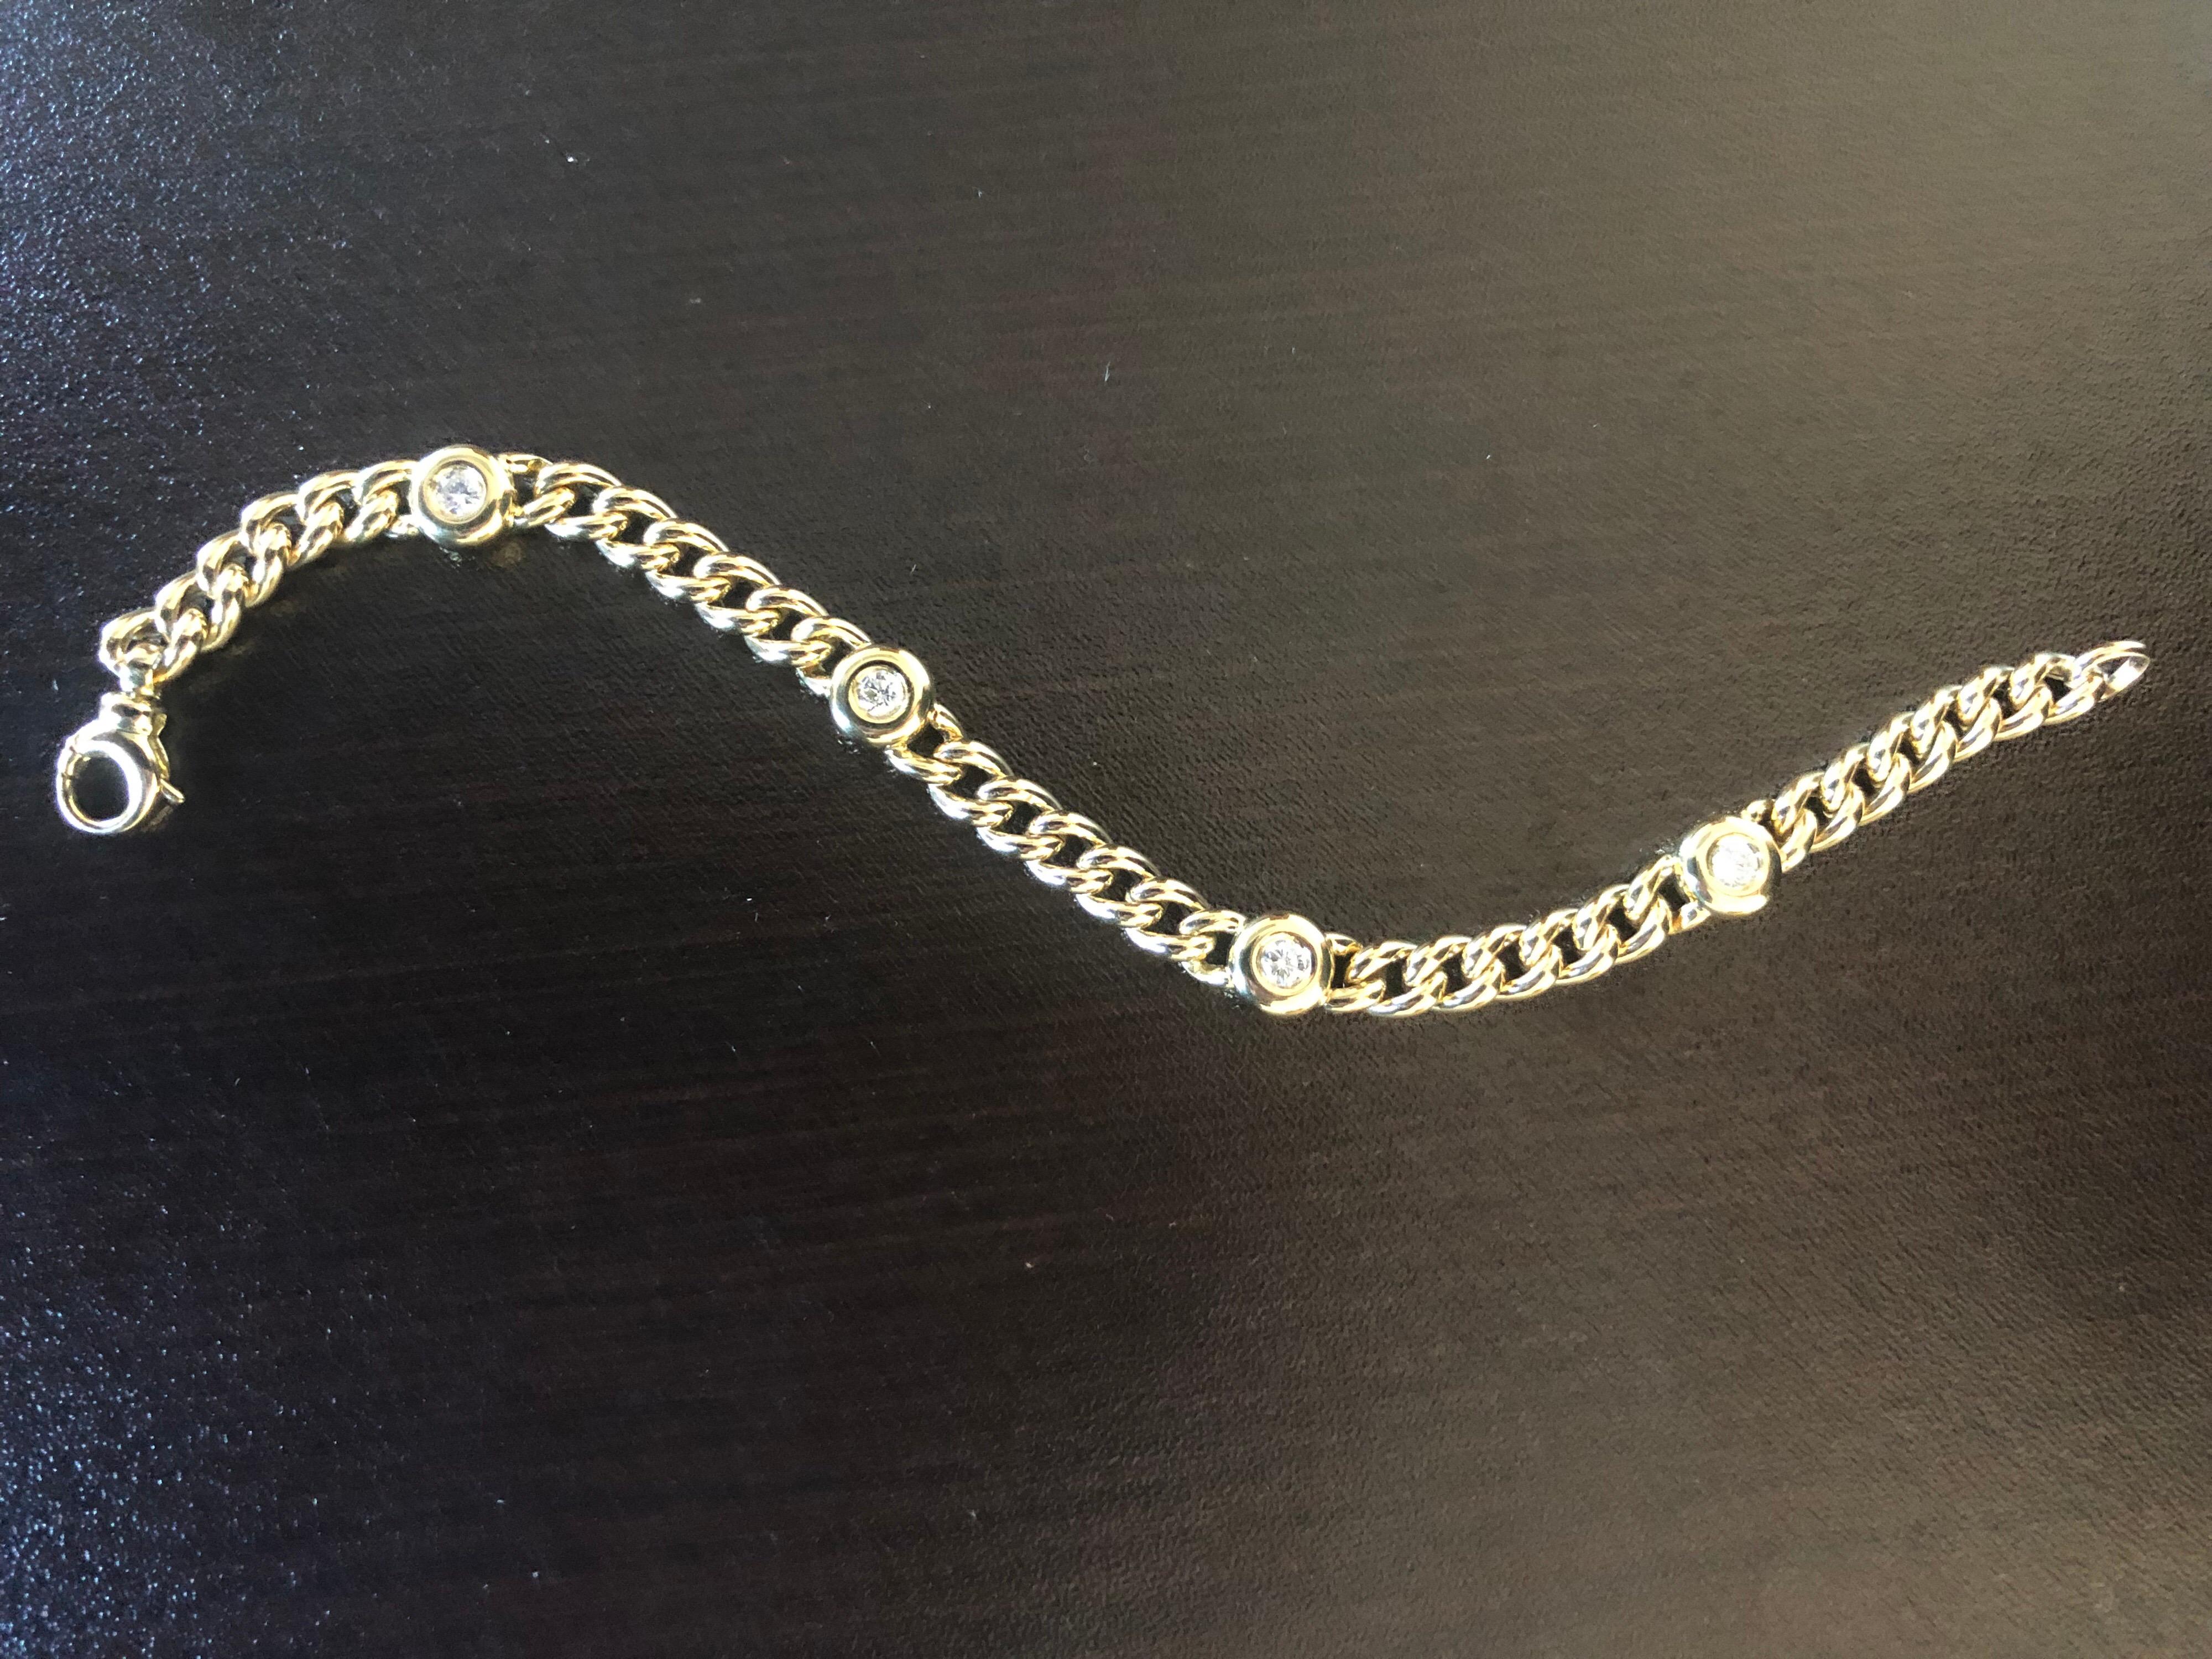 Diamond bezel bracelet set in an 18K yellow gold Cuban chain. Each stone is set in a bezel weighing 0.15 carats each, the total weight is 0.60 carats. The color of the stones are G, the clarity is SI1-SI2.